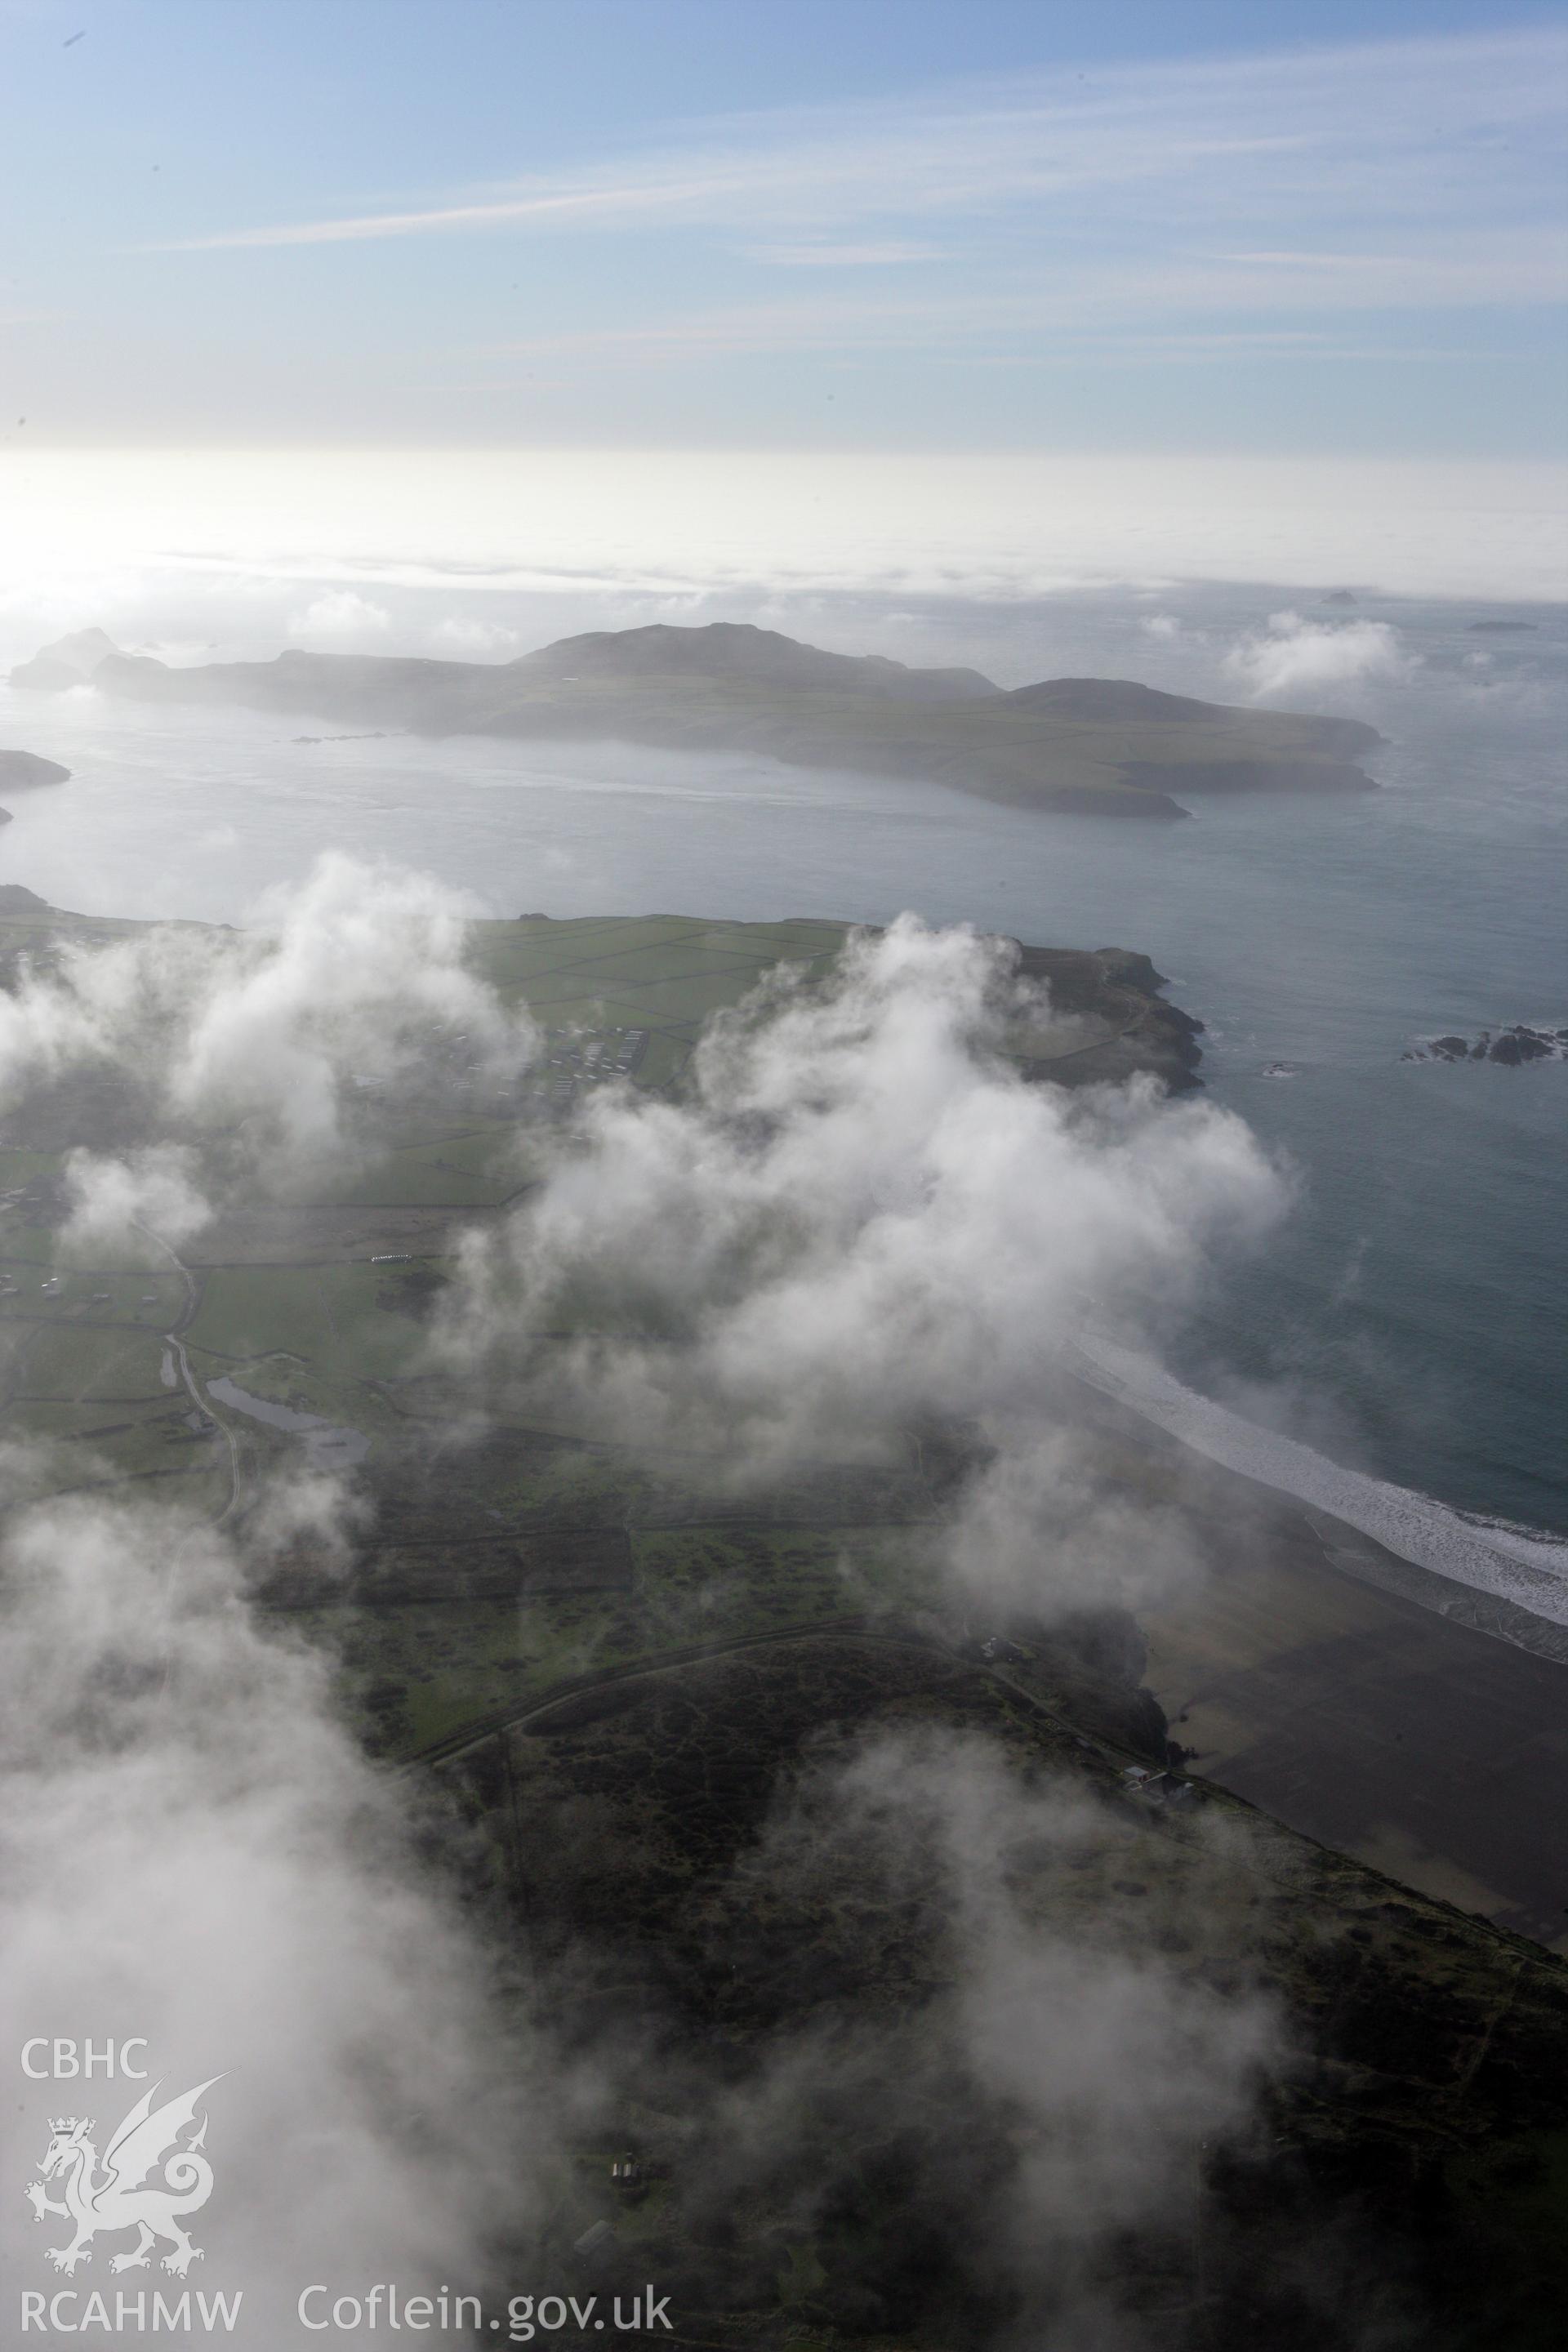 RCAHMW colour oblique aerial photograph of Whitesands Bay. A landscape view towards Ramsey Island, with clouds. Taken on 28 January 2009 by Toby Driver